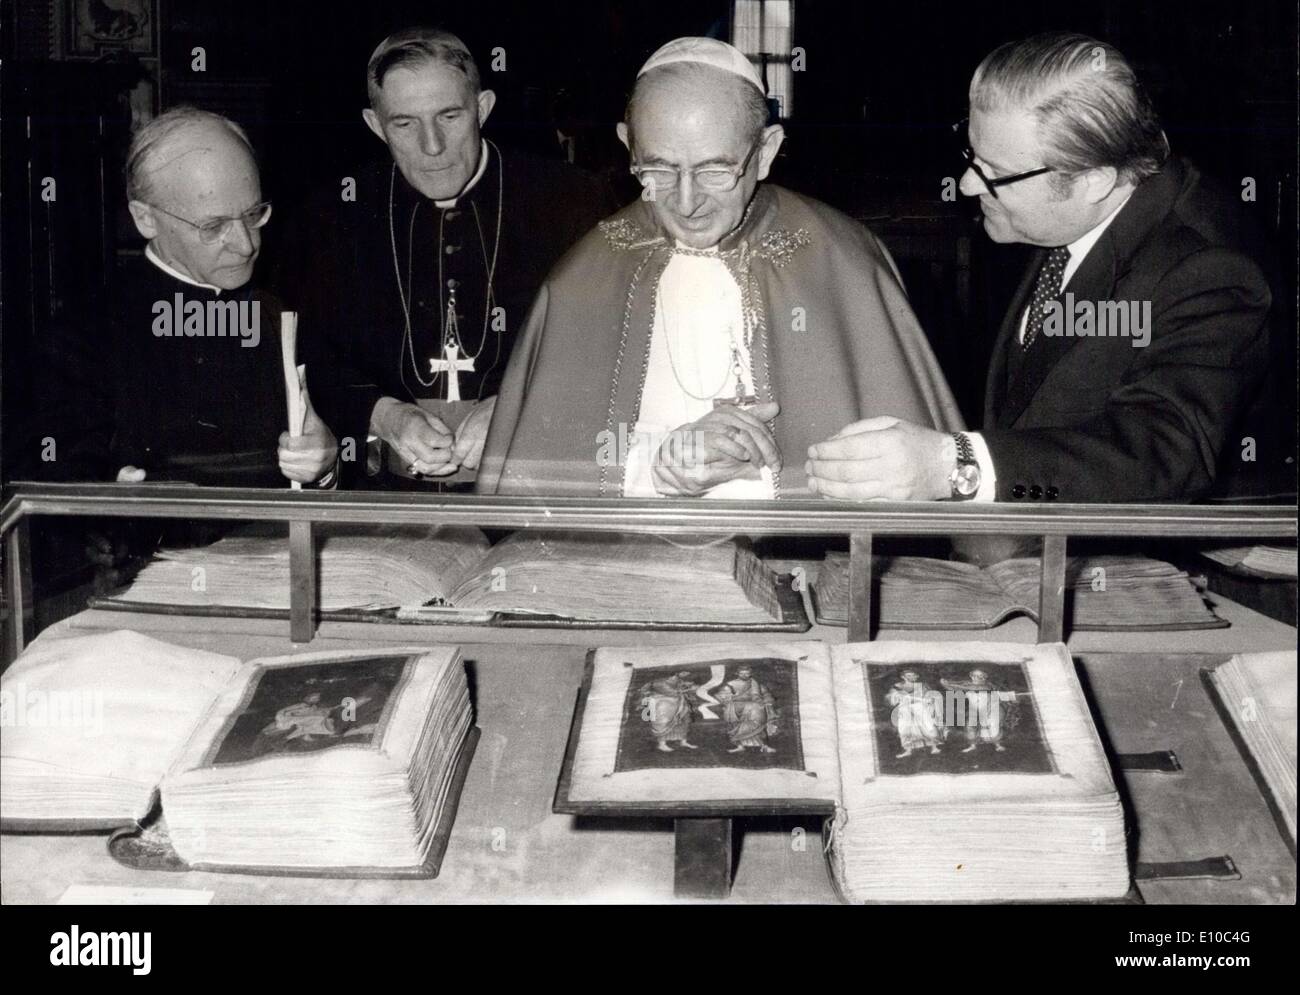 Mar. 28, 1972 - Pope opens exhibition of priceless Manuscripts. Pope Paul recently opened a unique exhibition of priceless manuscripts and fragments of the Bible in the frescoed Sistine Hall of the Vatican. The show will stay open to the public for one year to mark 1972 as the ''year of the Book as proclaimed by UNESCO. The exhibition includes Bibles of all centuries from the third century on. Besides the manuscripts, it will also show the most valuable printed editions. Also on show is the most valuable printed editions Stock Photo